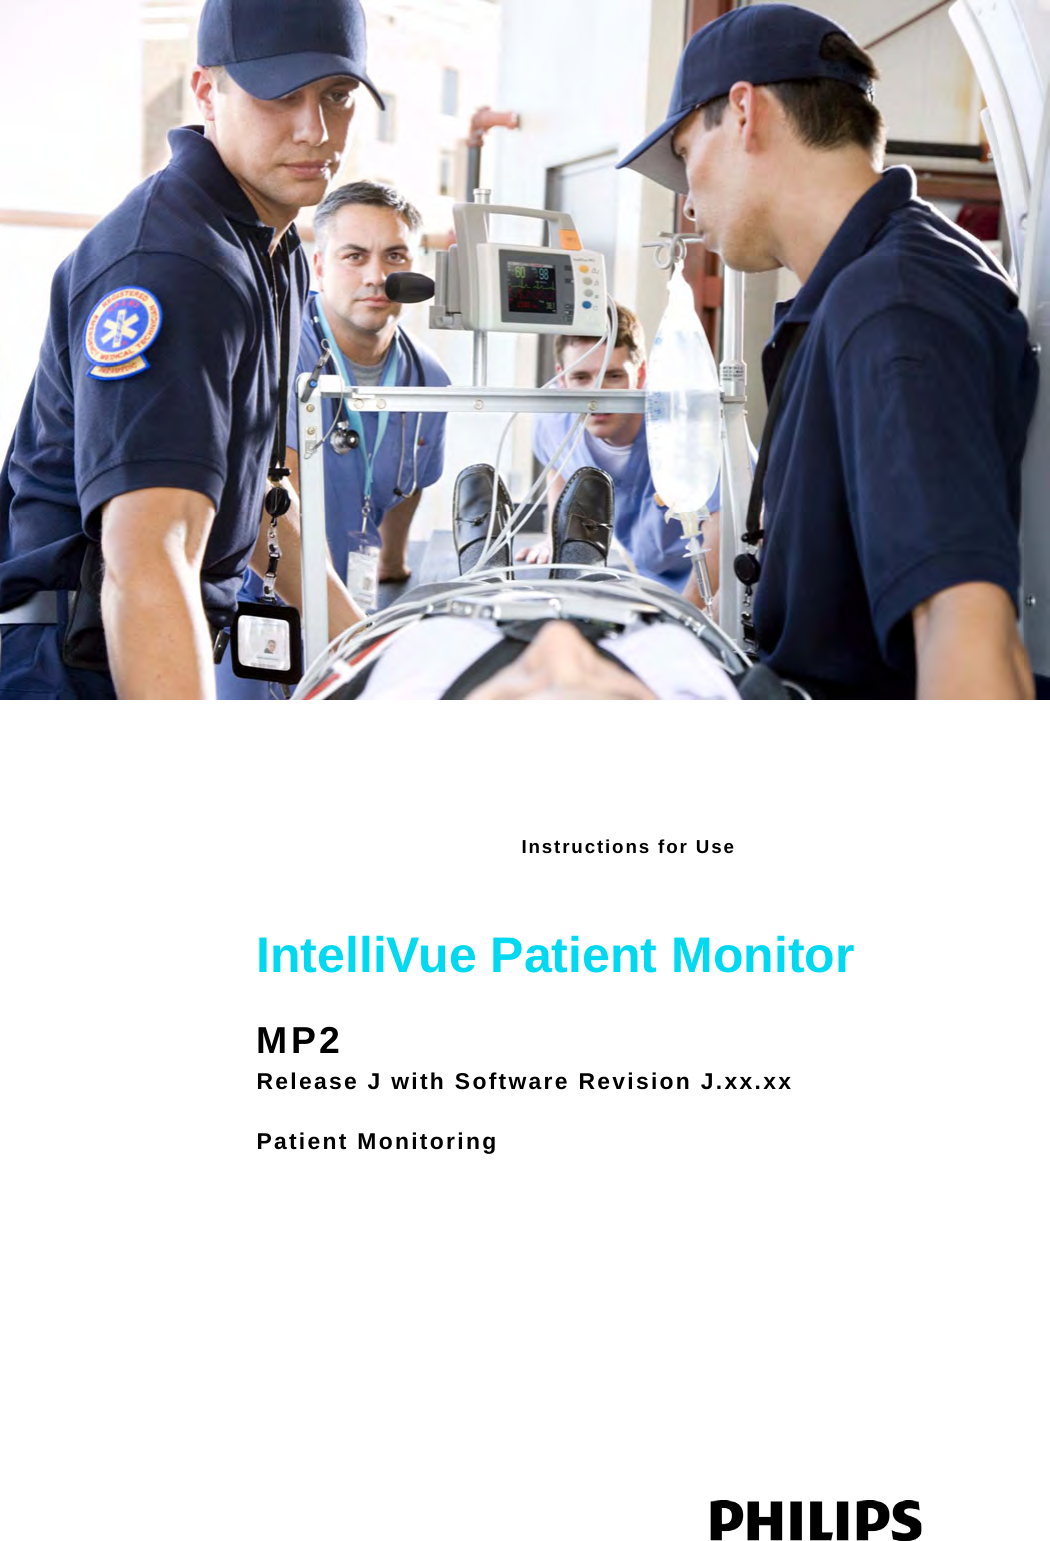 Instructions for Use IntelliVue Patient MonitorMP2Release J with Software Revision J.xx.xxPatient Monitoring